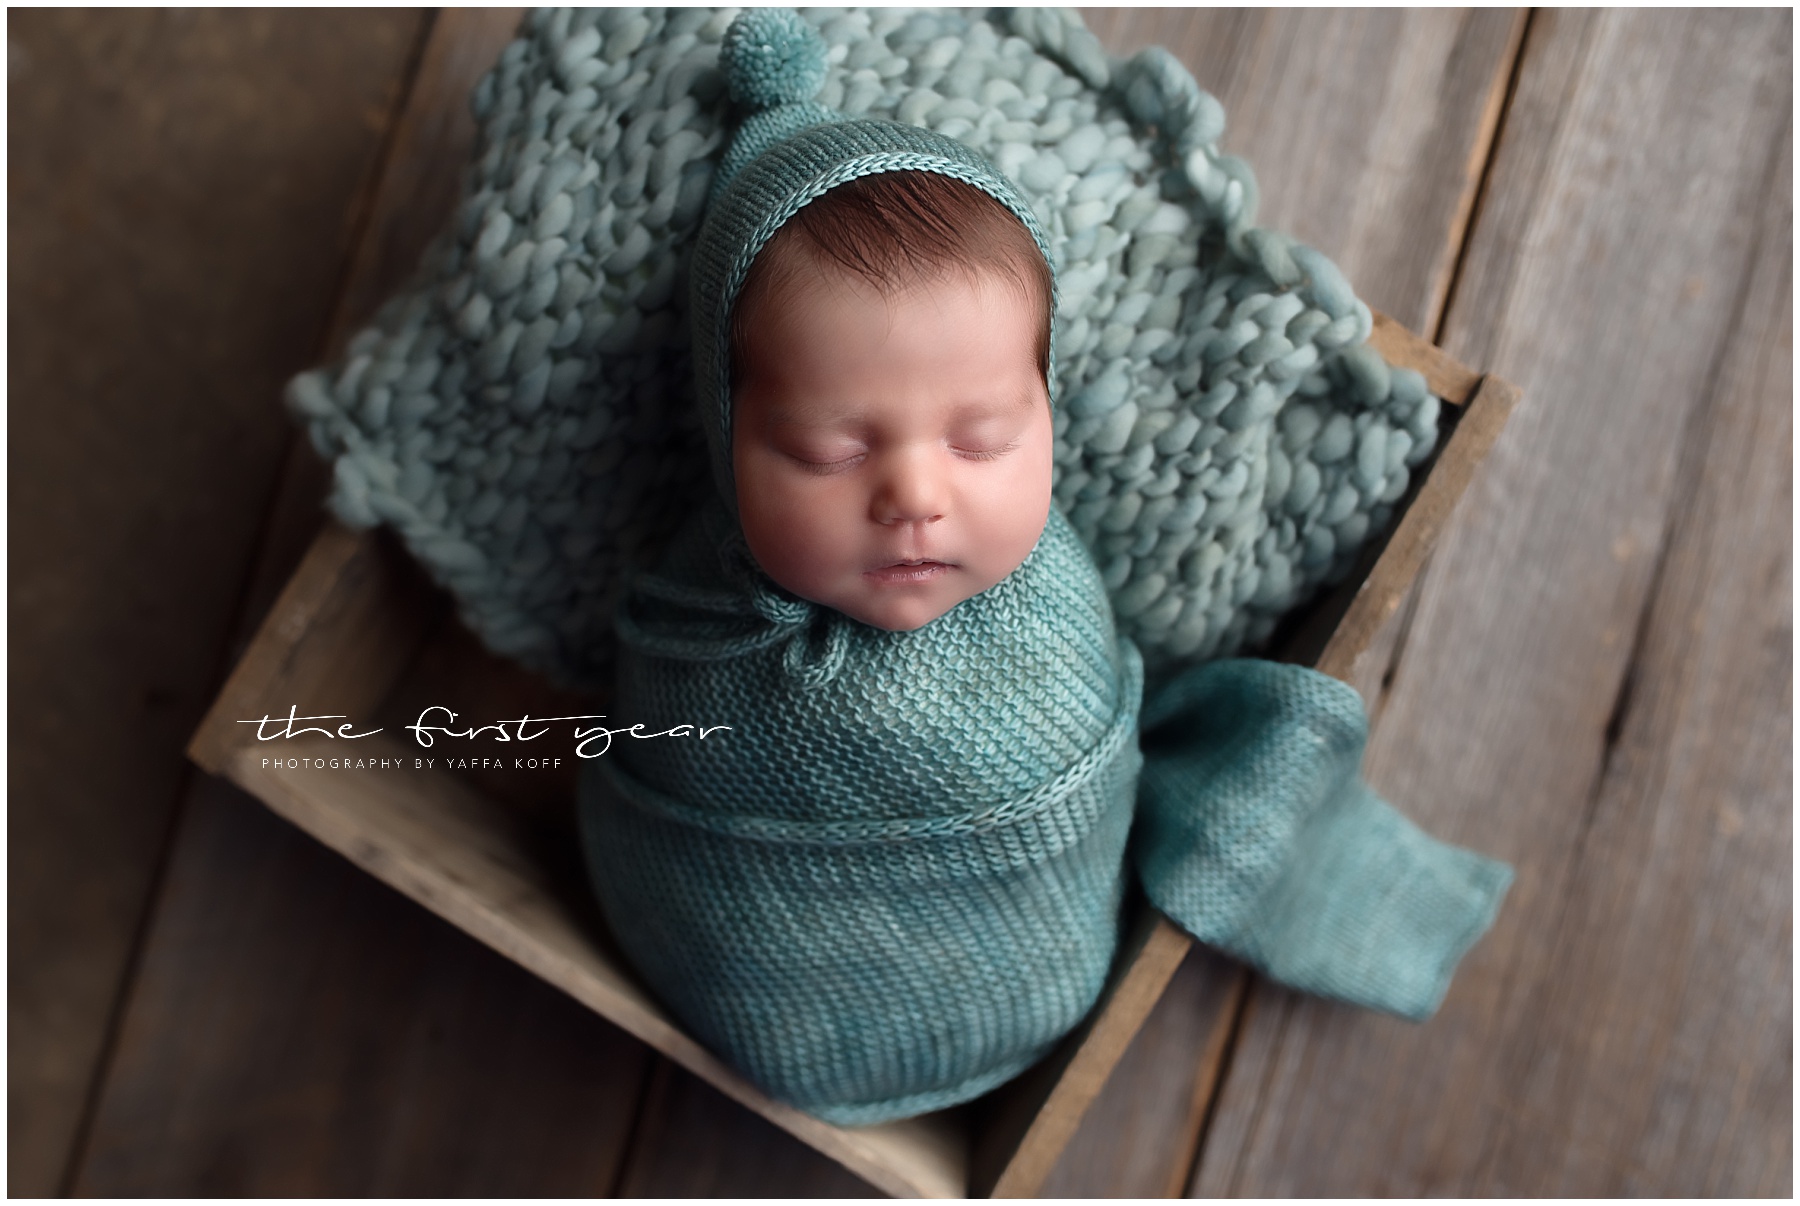 What to Look for When Choosing a Newborn Photographer